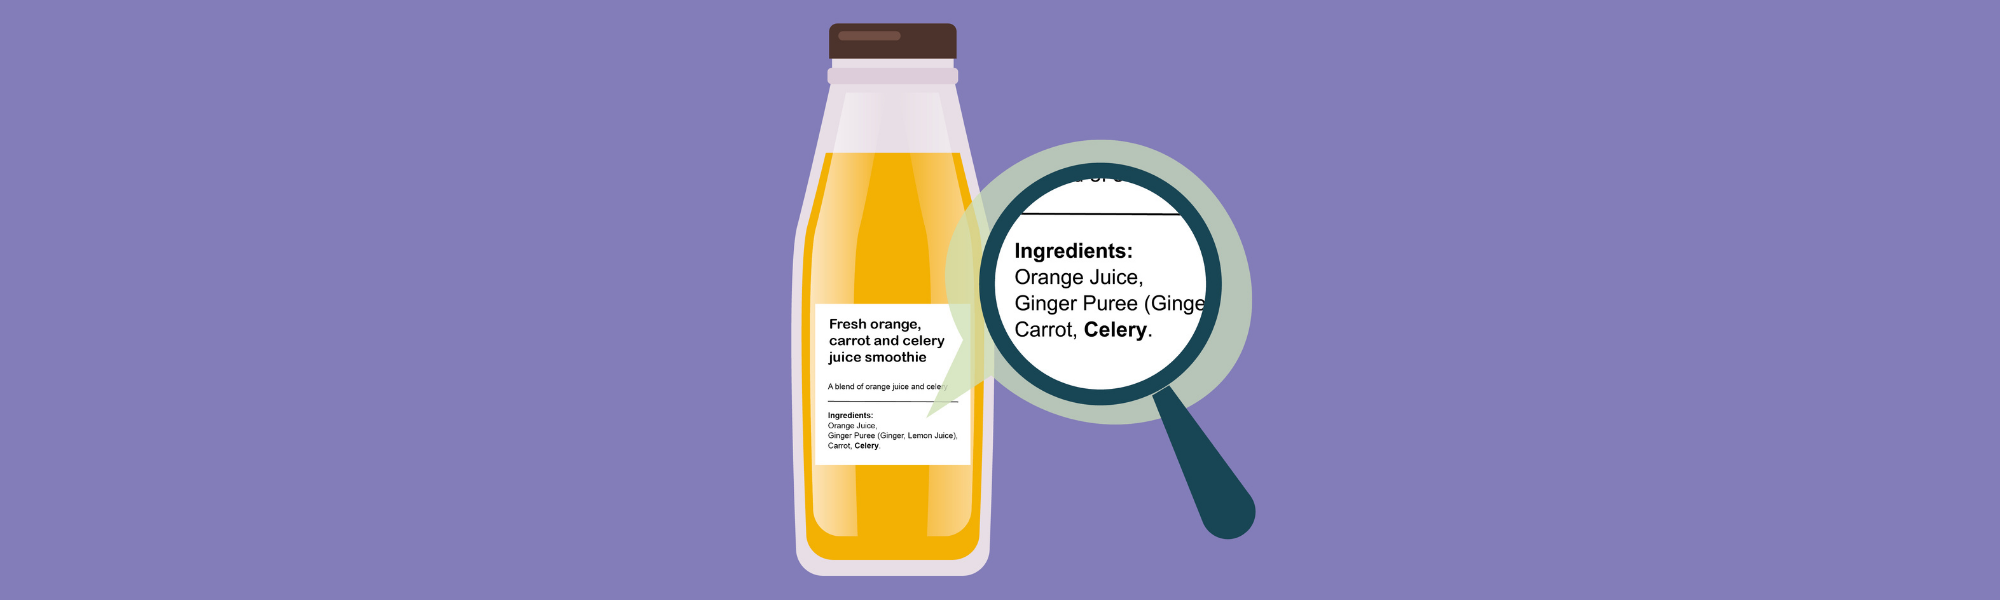 Bottle of fresh juice with PPDS food labelling